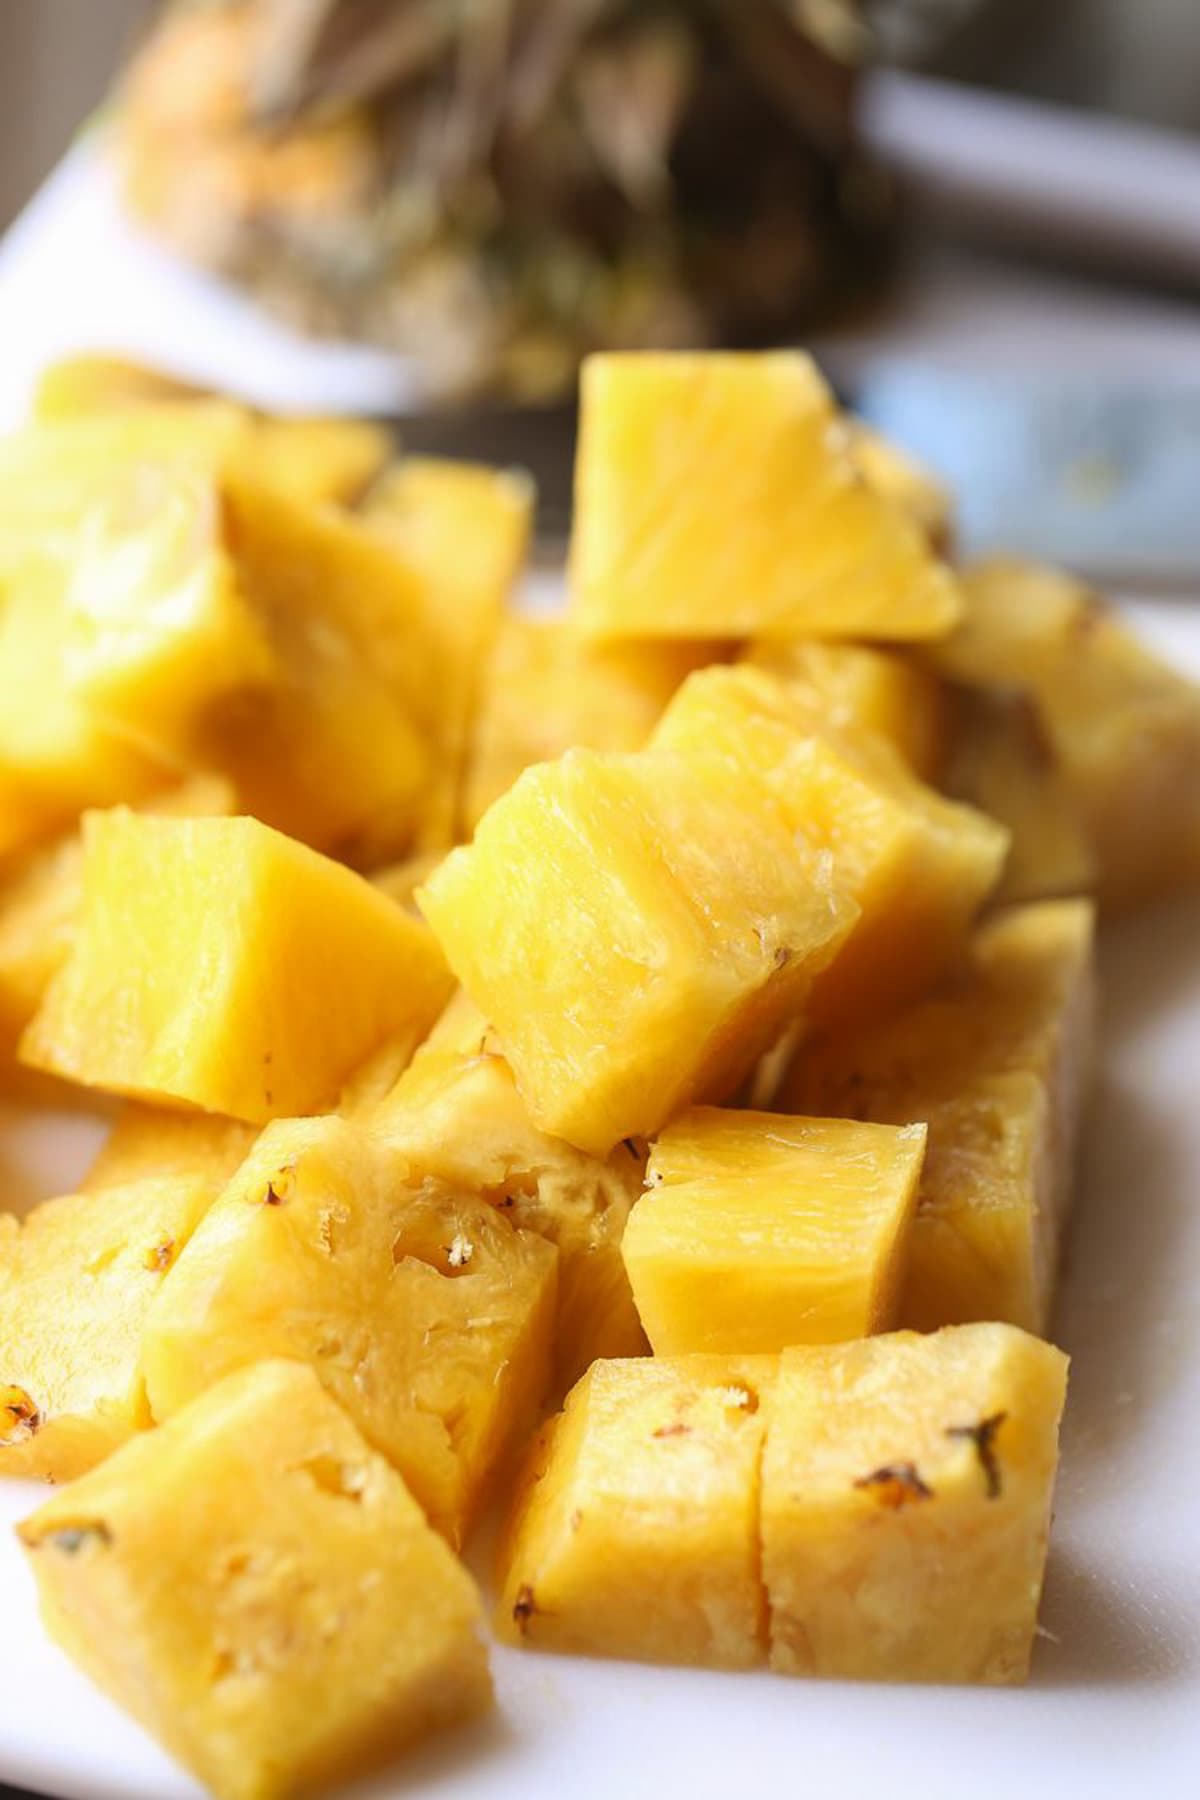 Pineapple cubed into pieces 